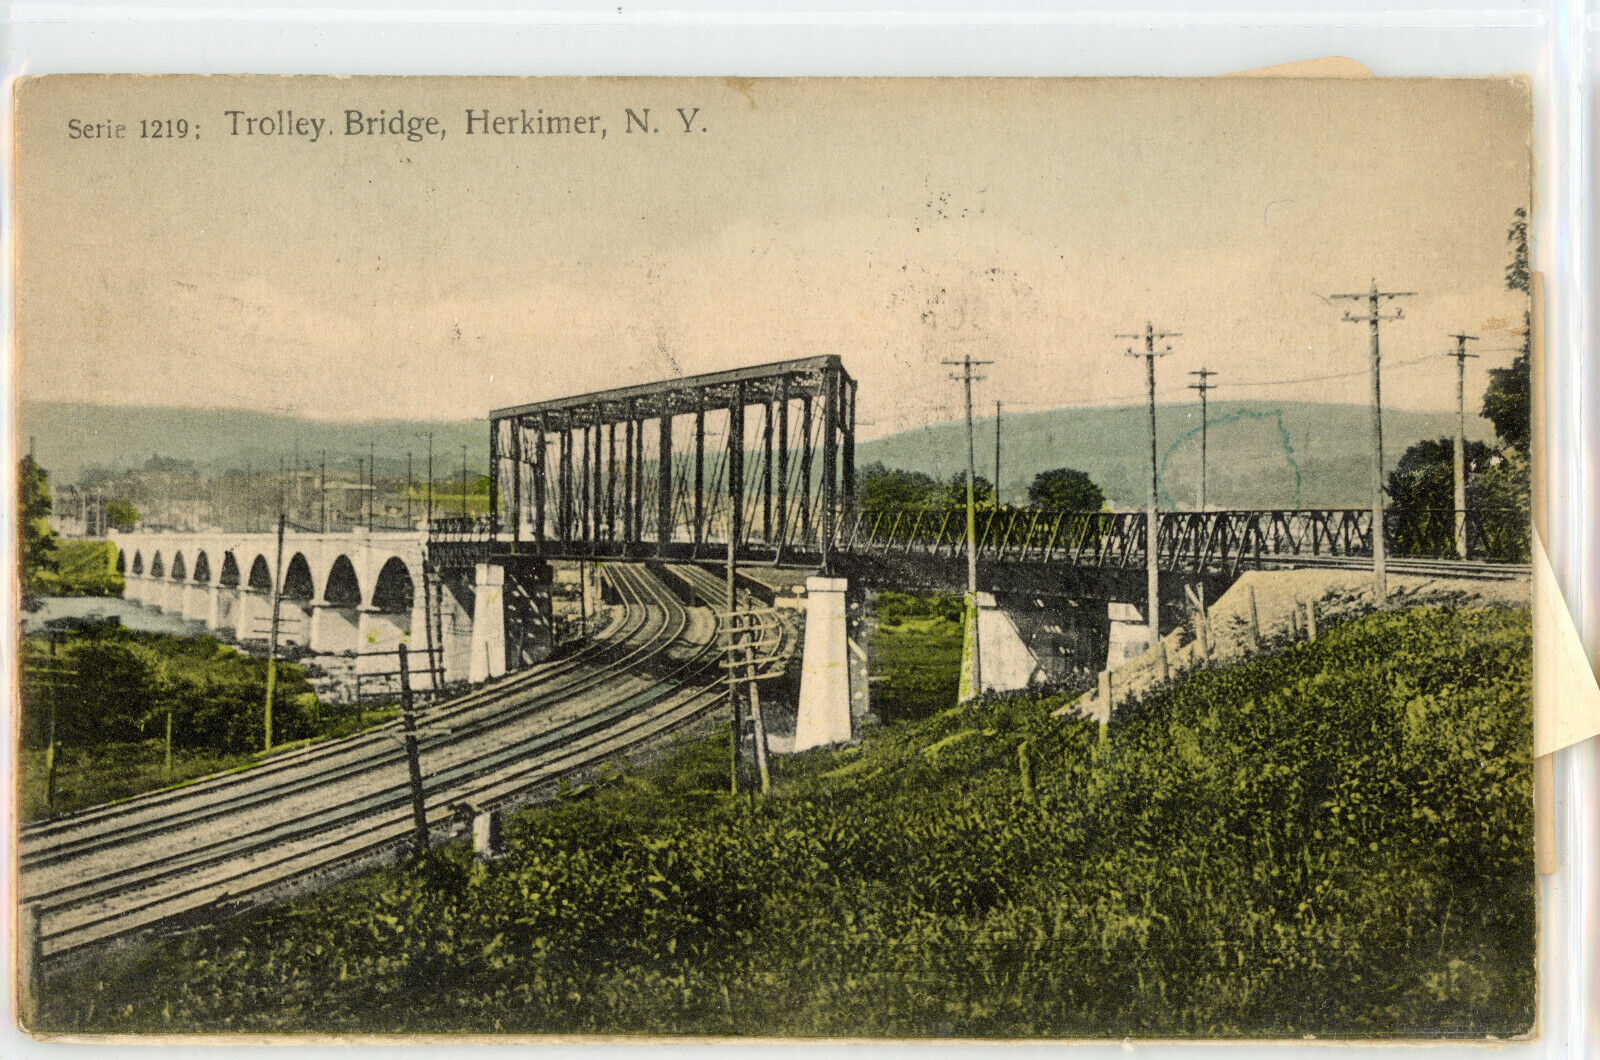 Trolley, Bridge, other views of Herkimer, NY, ca. 1910 postcard